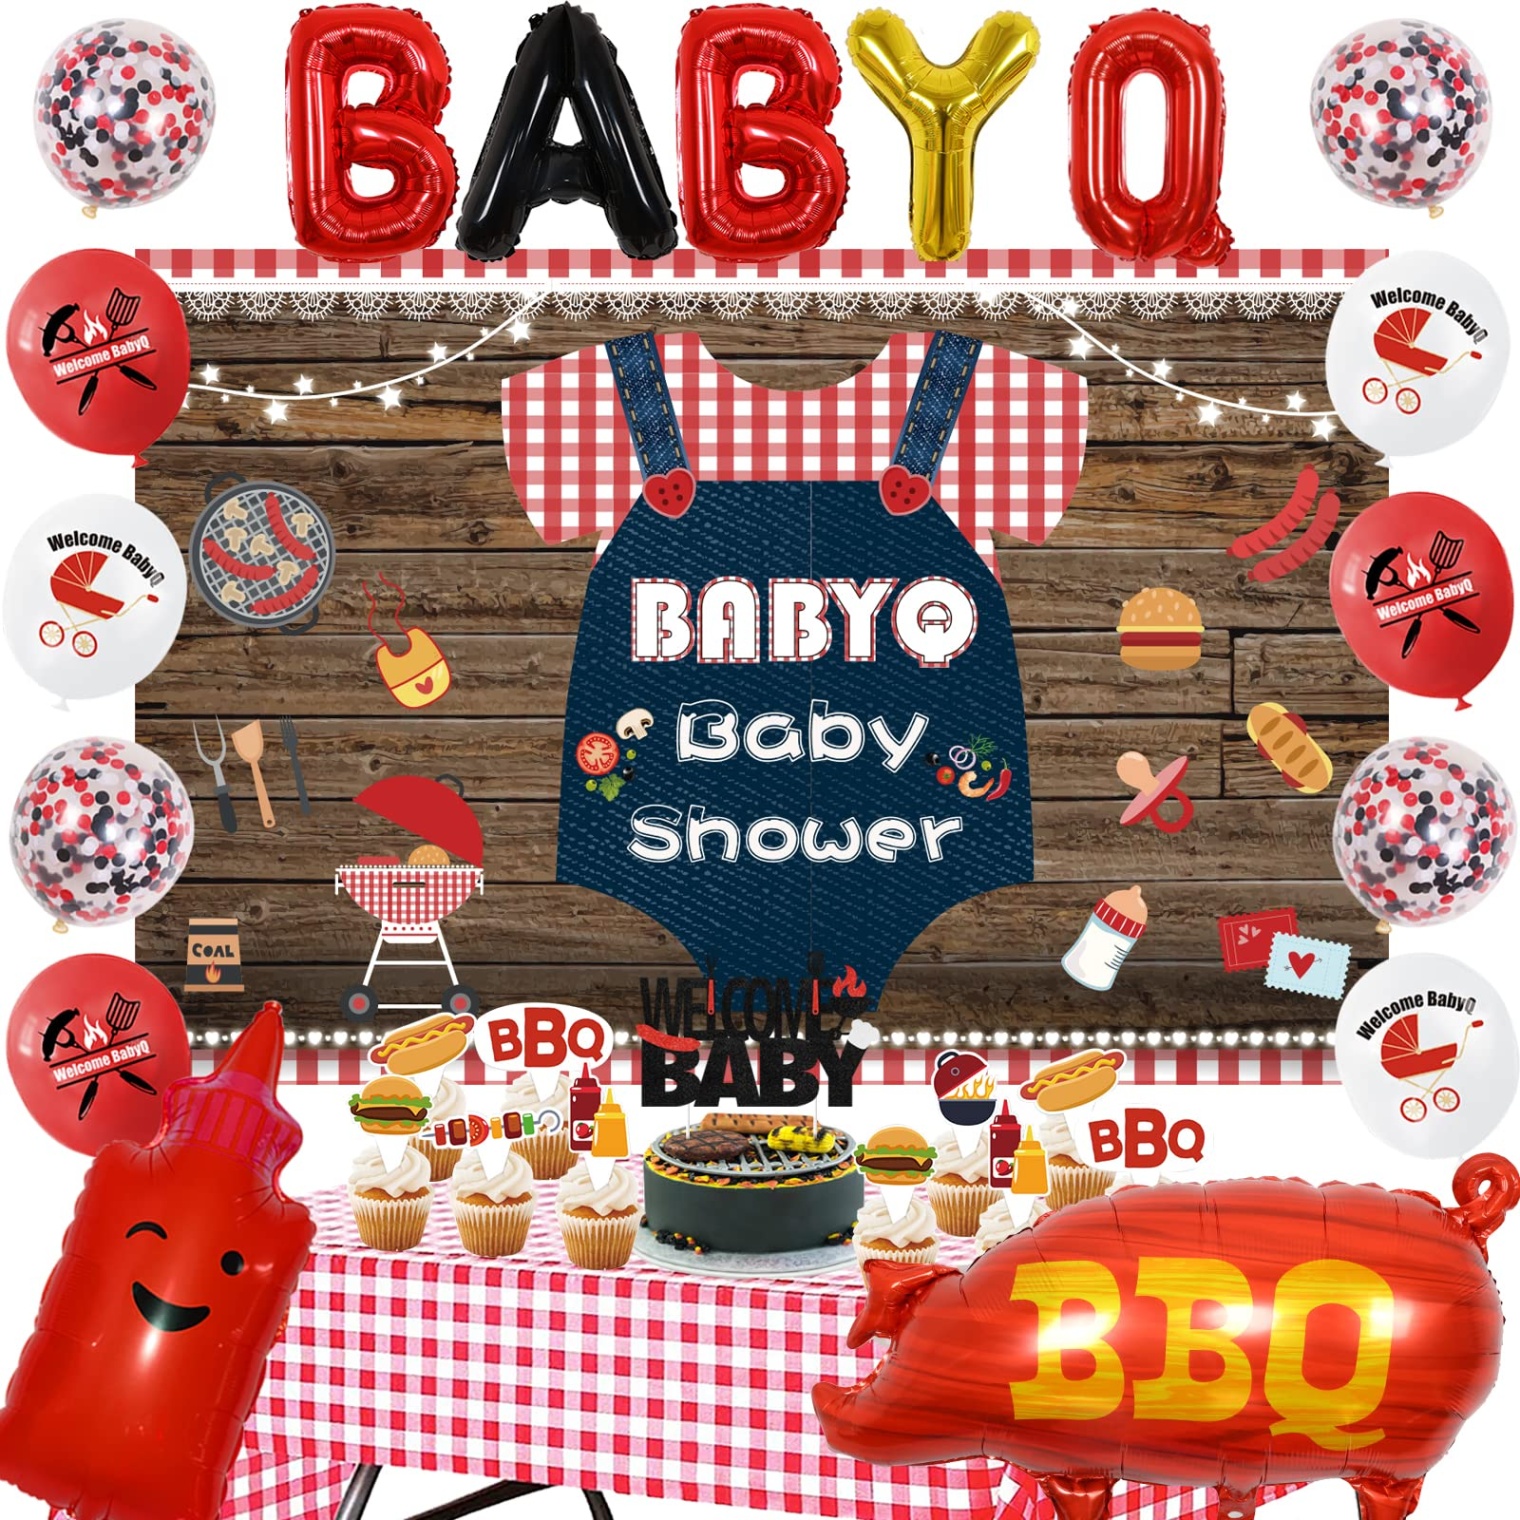 baby q decorations Bulan 3 BBQ Baby Shower Decorations, Baby Q Party Decorations with Barbecue Themed  Baby Shower Backdrop, Red Checked Tablecloth, Baby Q Cupcake Toppers Foil